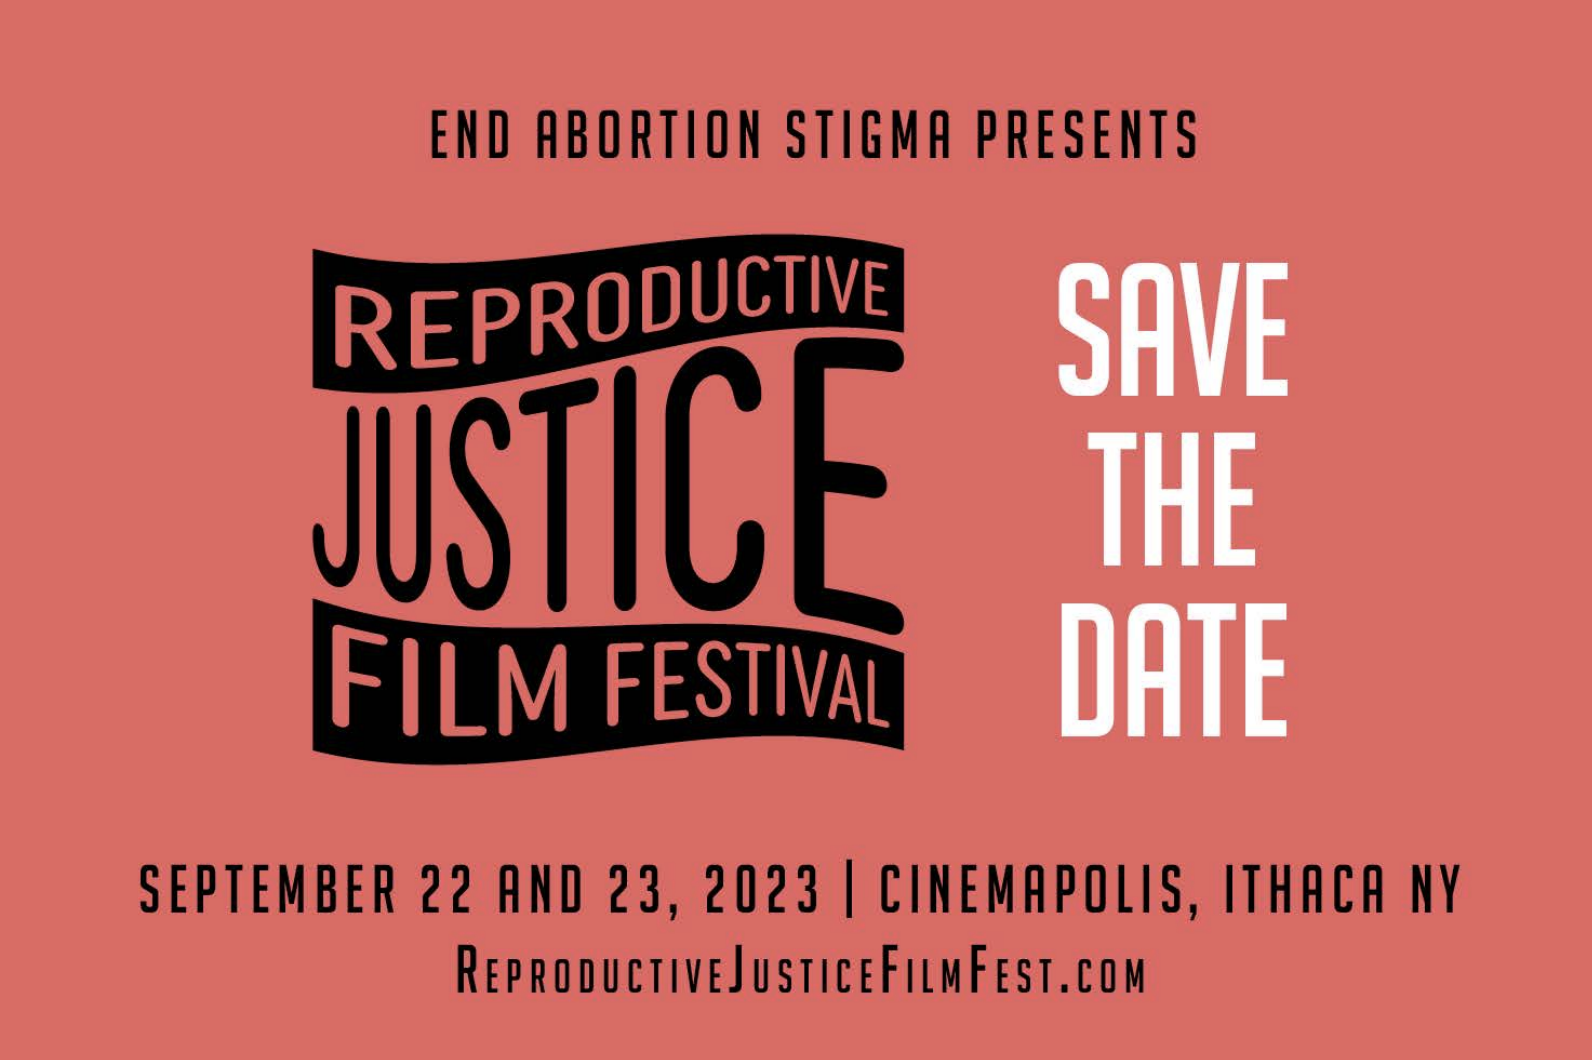 Reproductive Justice Film Festival Save the Date